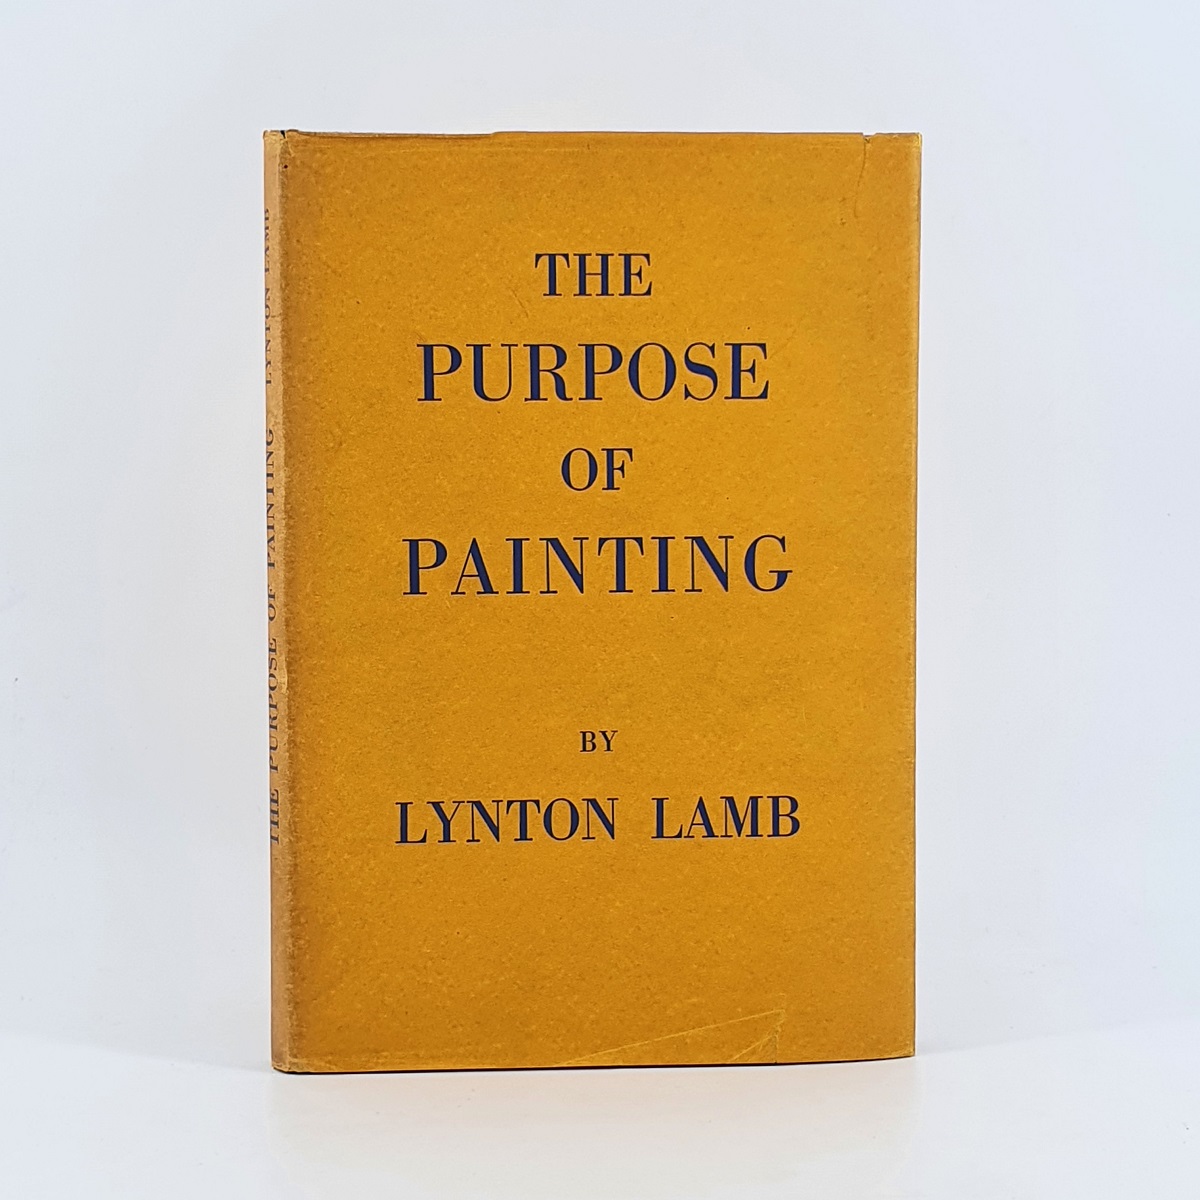 The Purpose of Painting